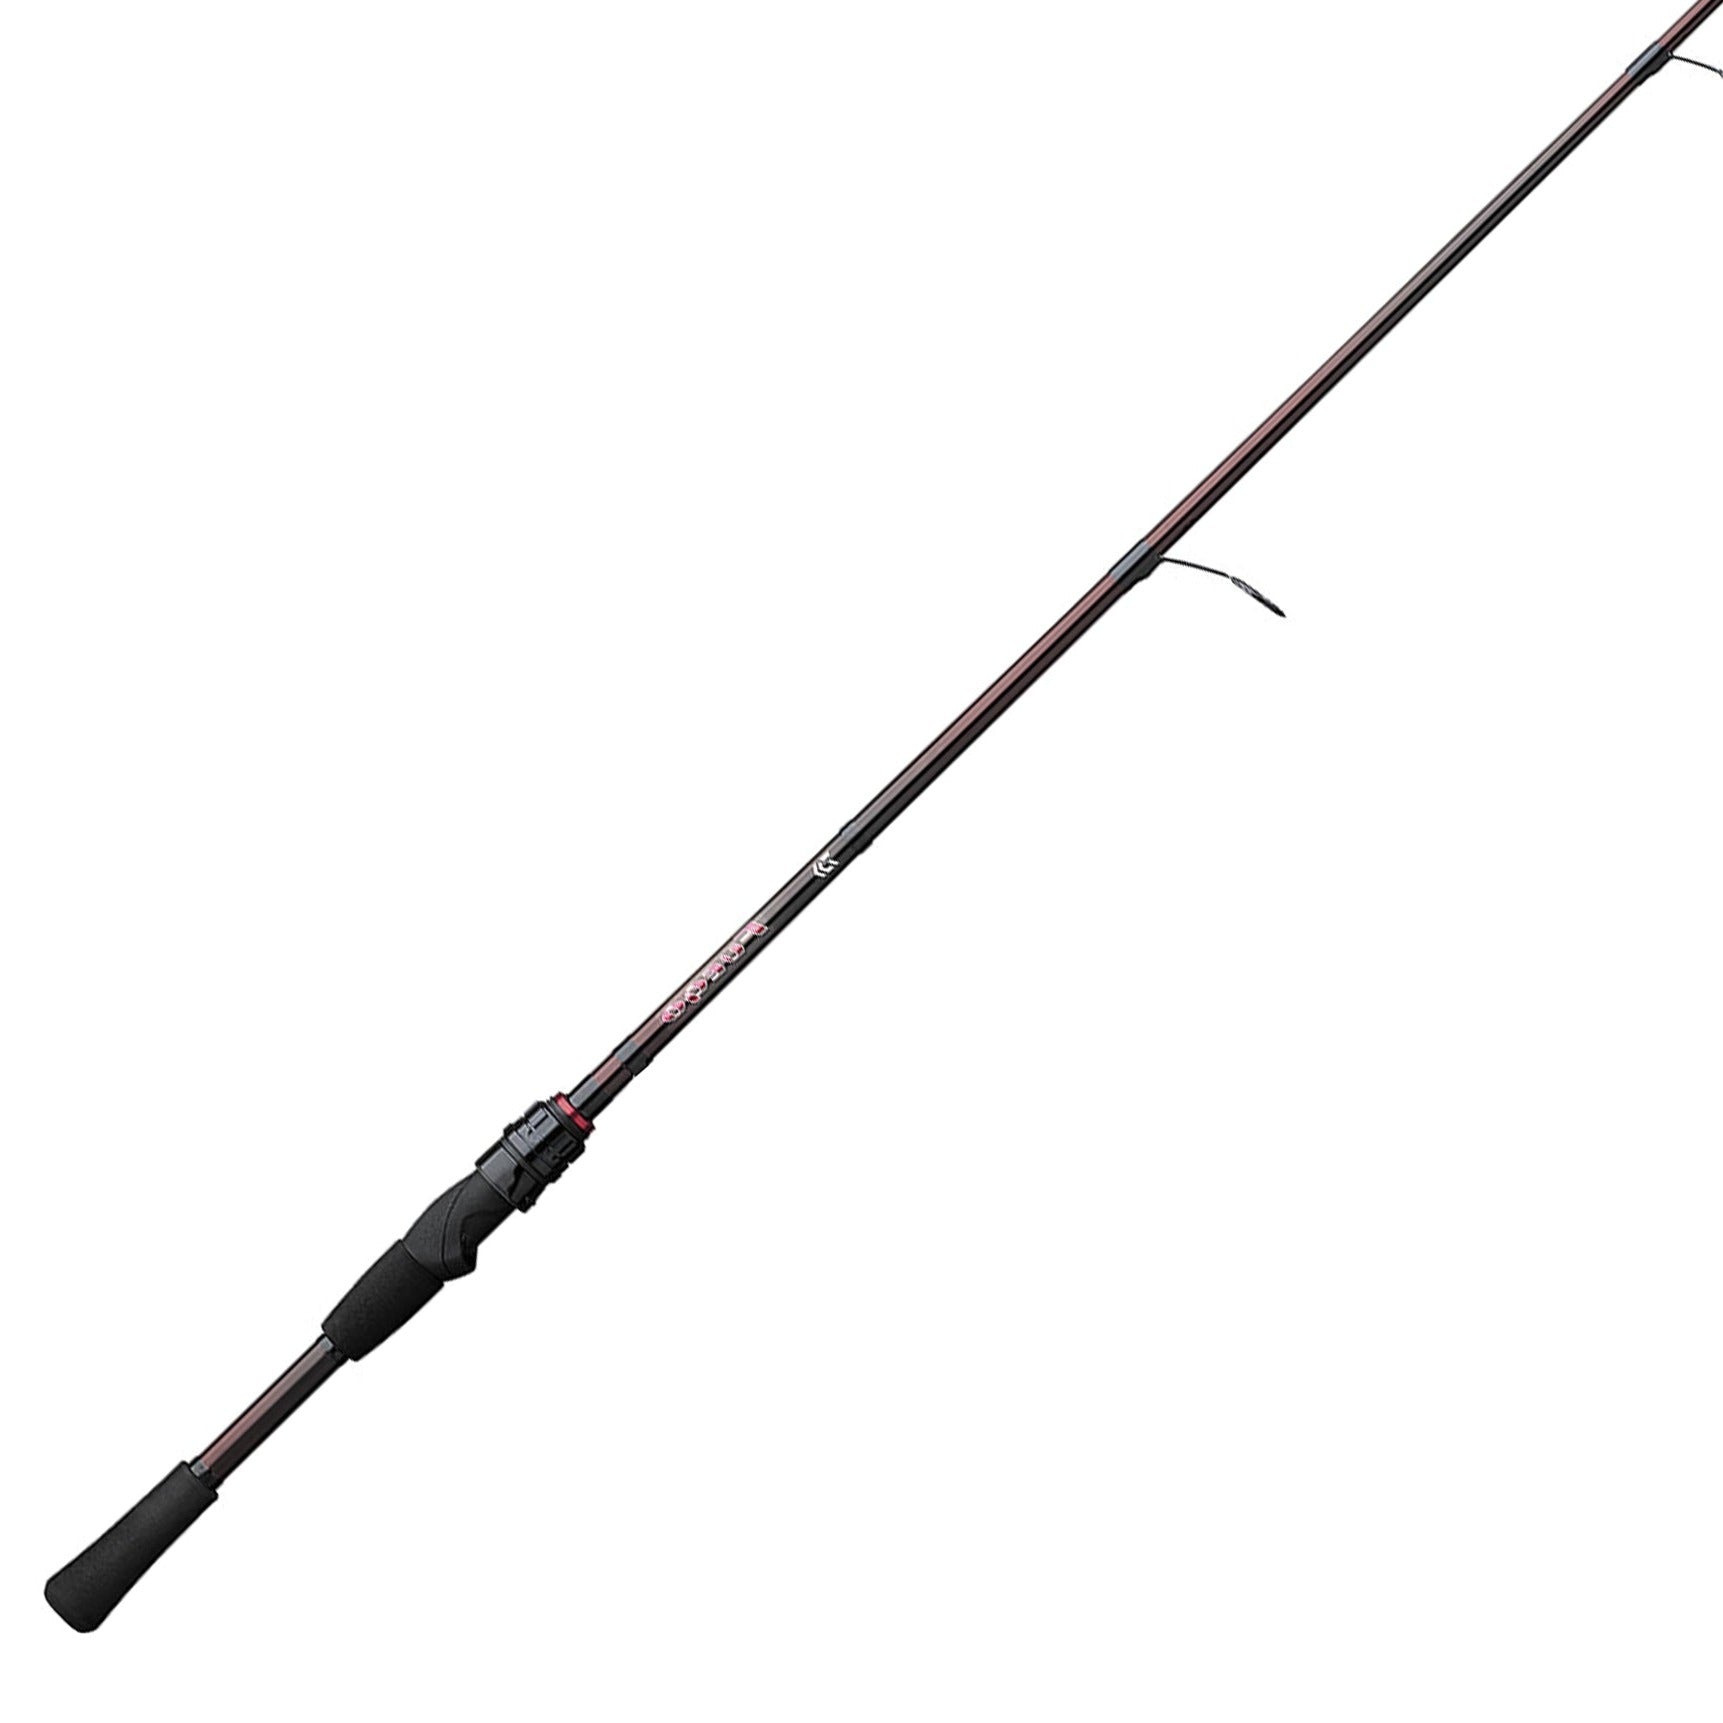 spinning rod daiwa, spinning rod daiwa Suppliers and Manufacturers